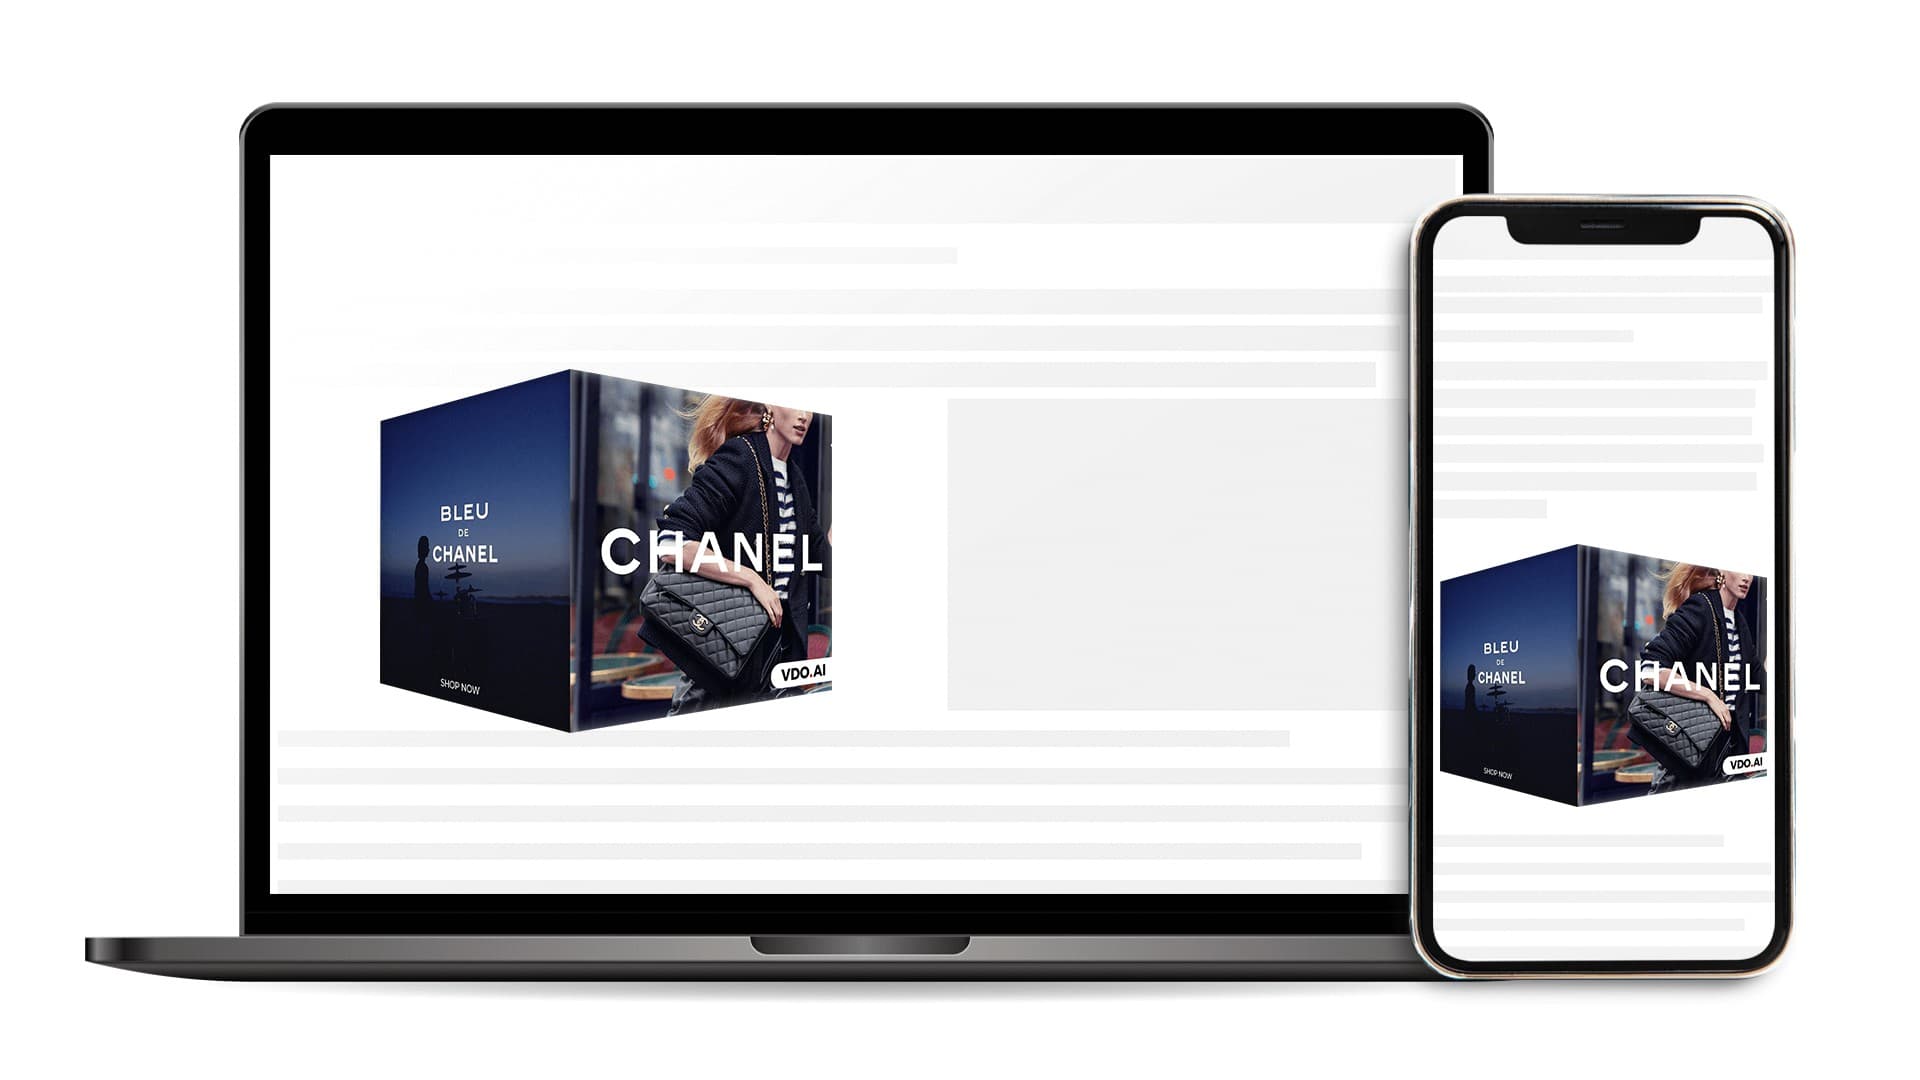 Unleashing Captivating Interactions: Chanel Leverages VDO.AI's 3D Impact for Enhanced User Engagement and Brand Visibility